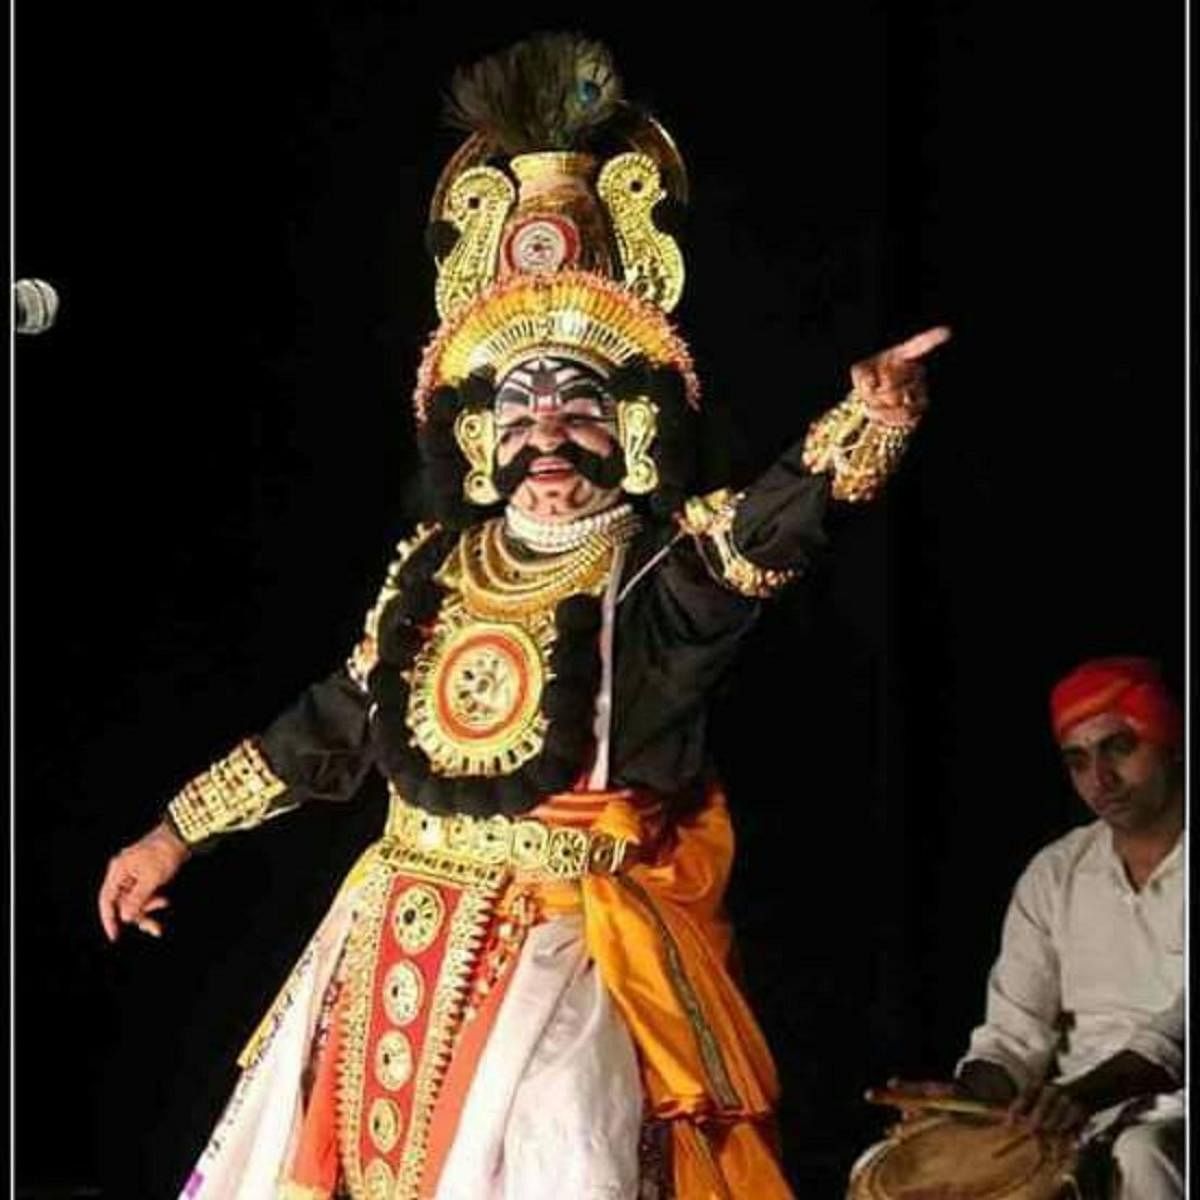 A file photo of a Yakshagana artiste in performance.